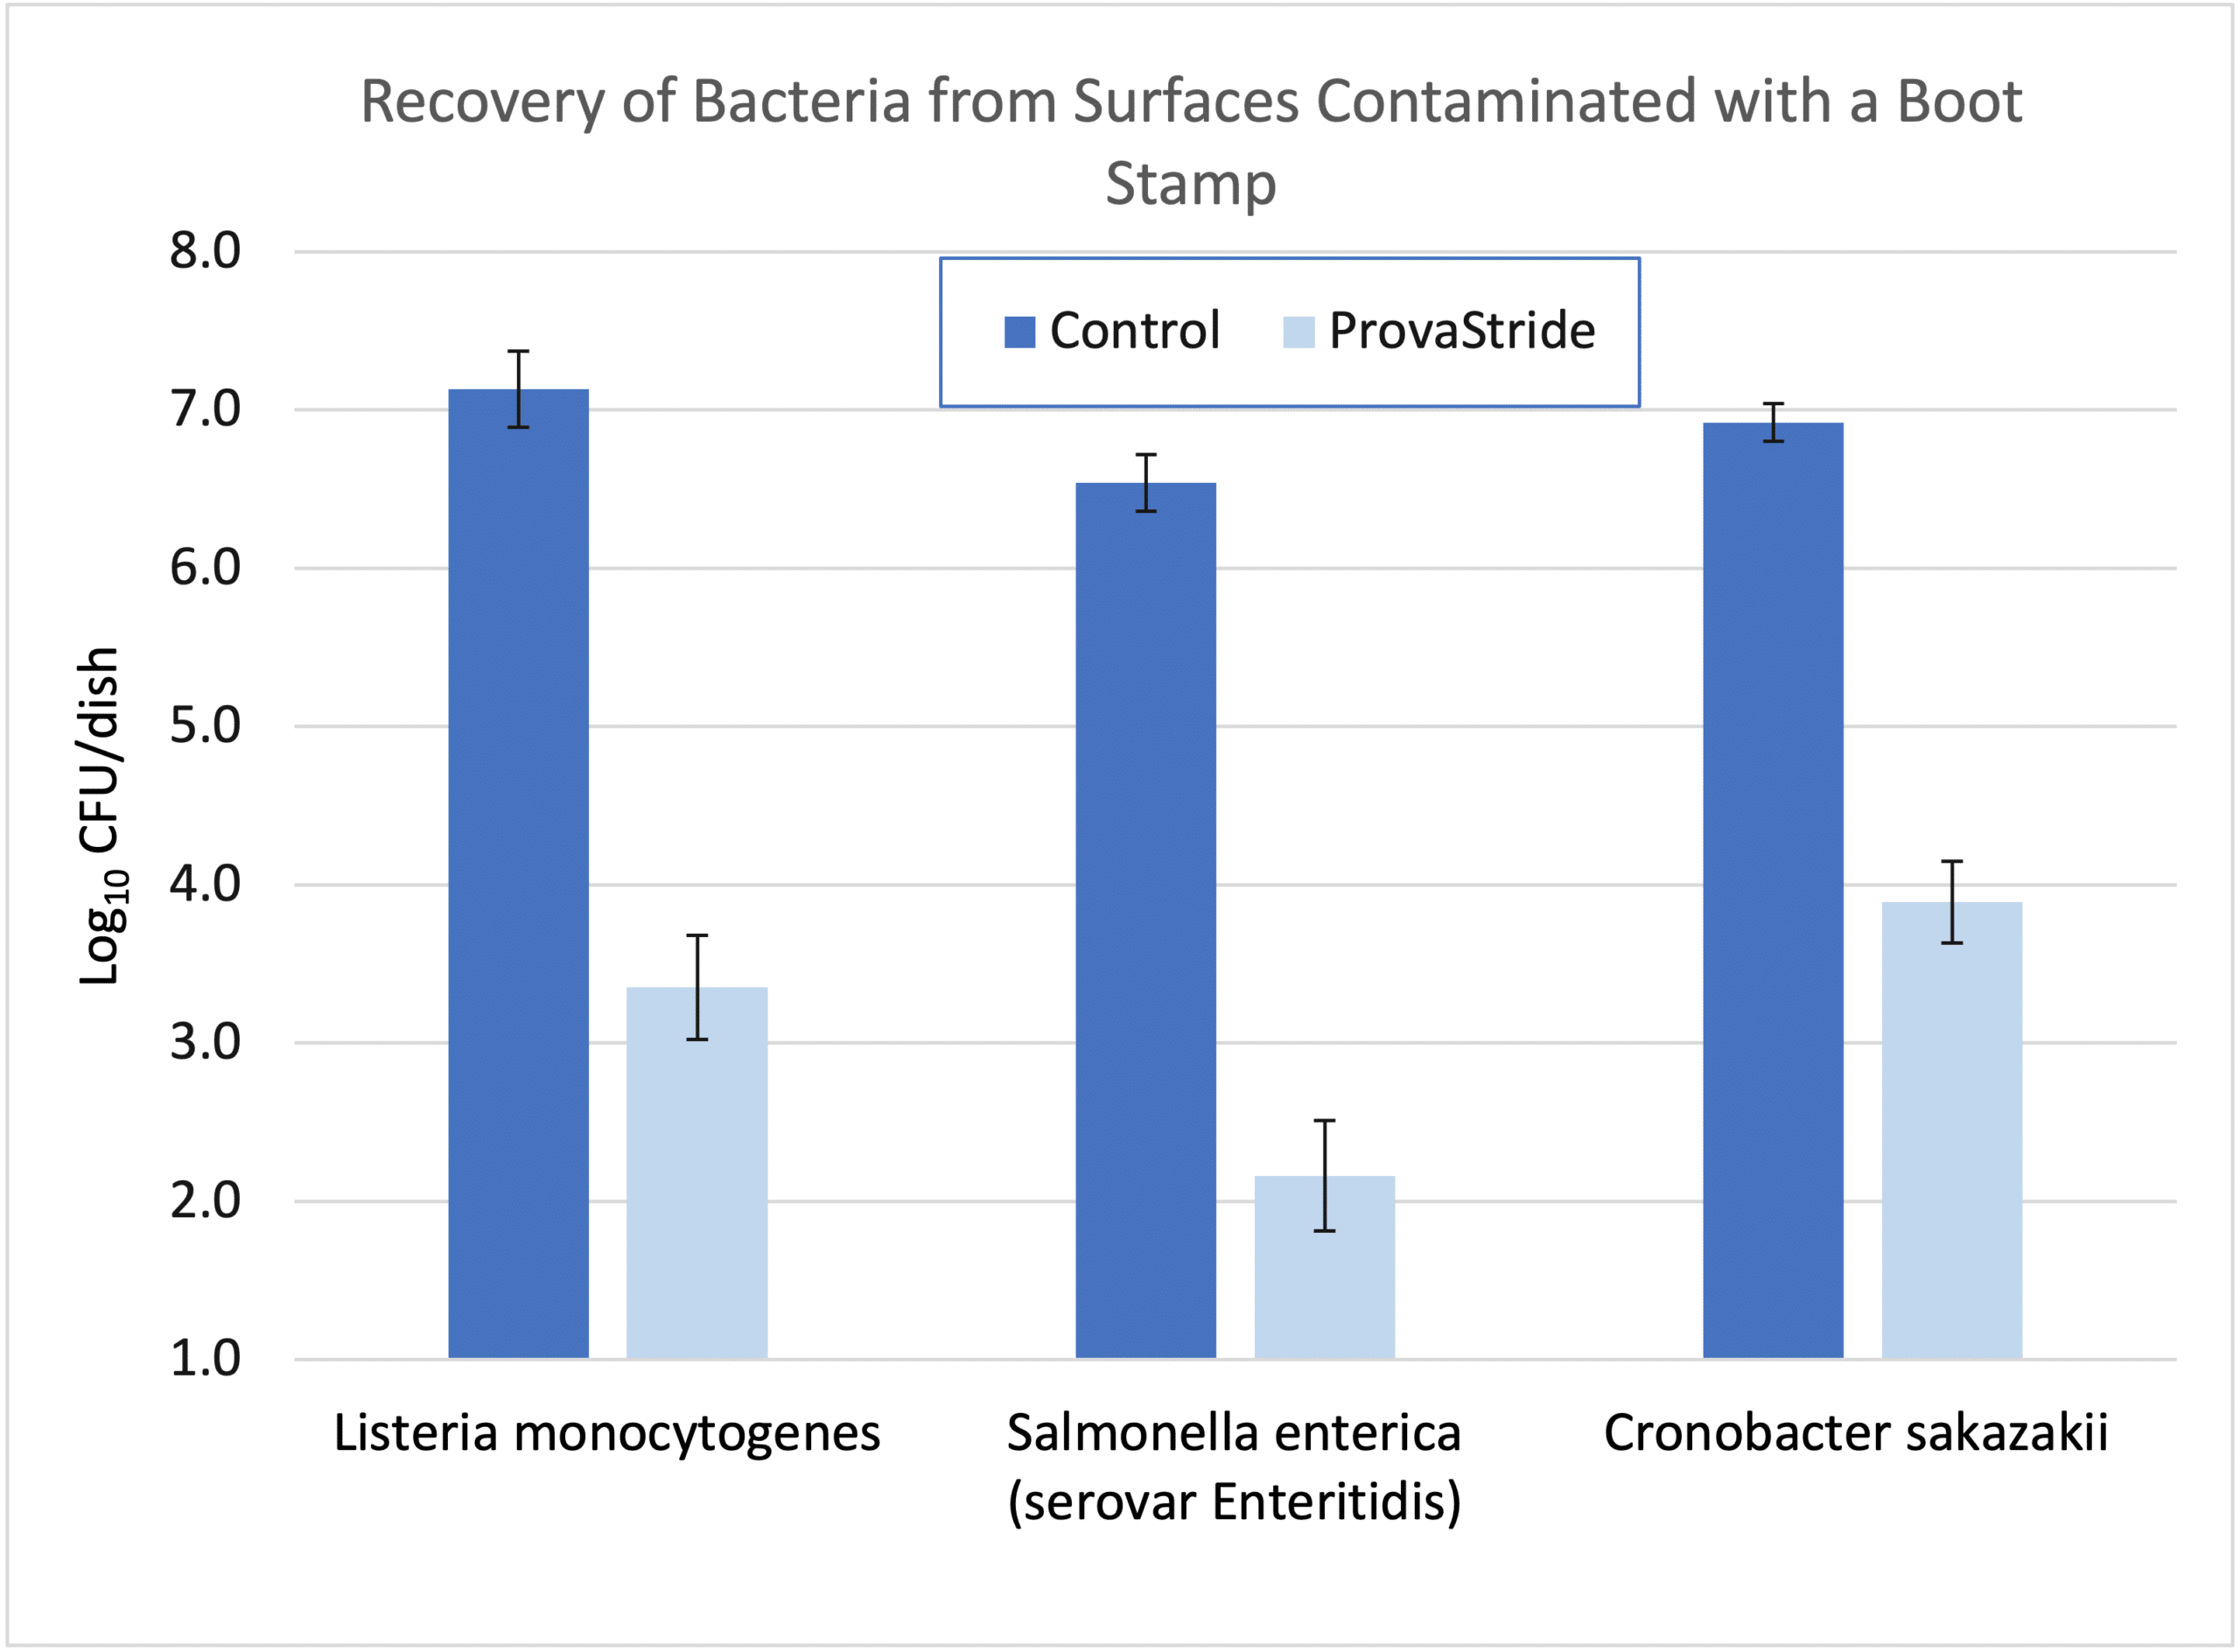 Chart showing recovery of surfaces contaminated with a boot stamp - control vs treated with ProvaStride